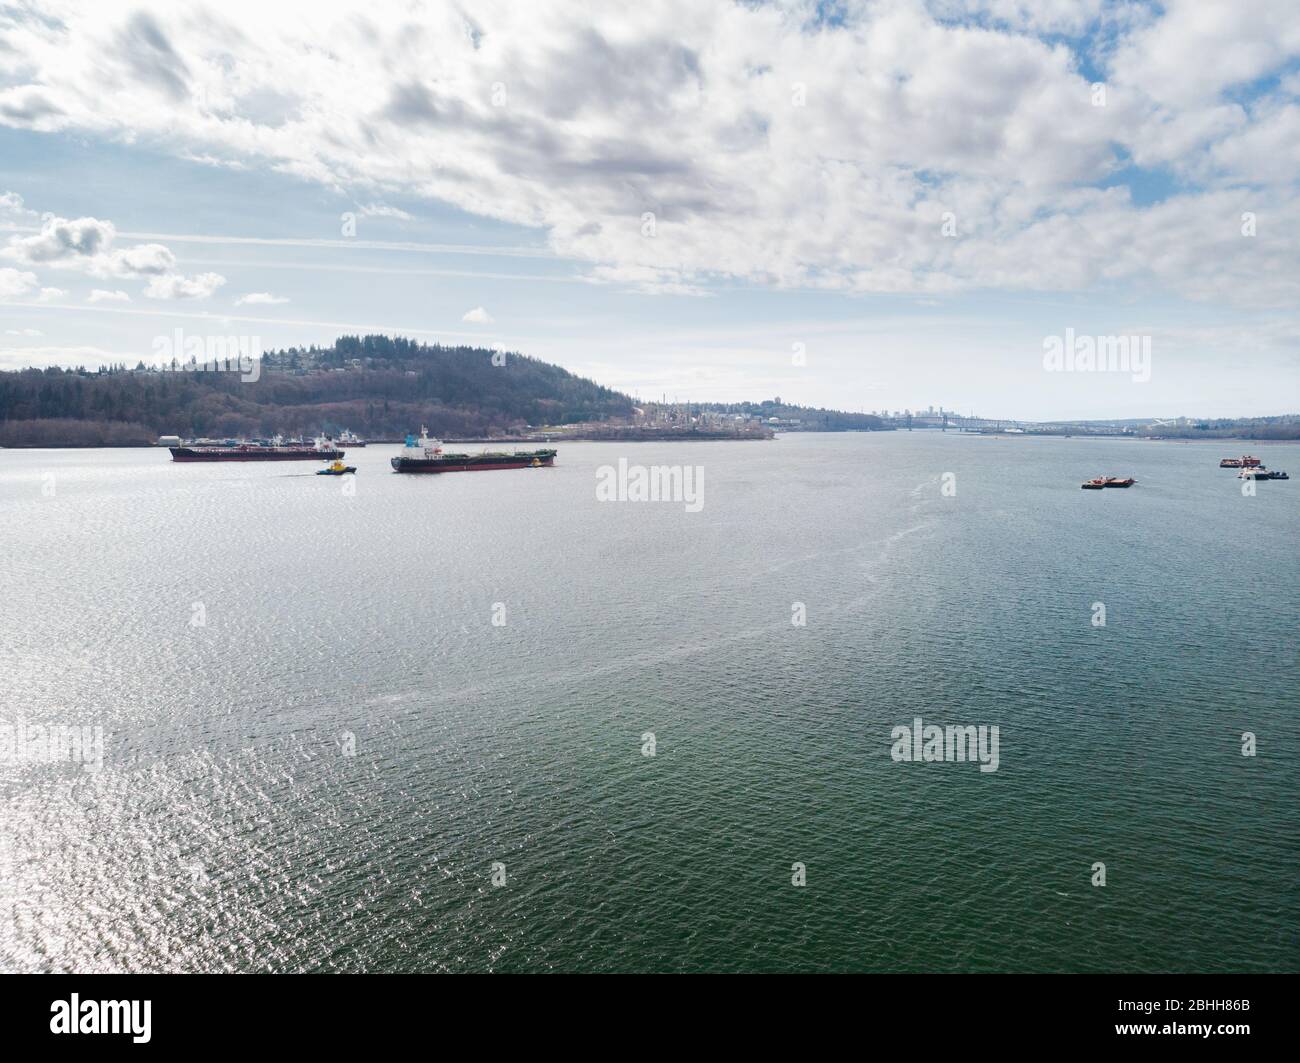 Aerial shot of a oil tanker in Burrard Inlet with near the Parkland refinery. Stock Photo